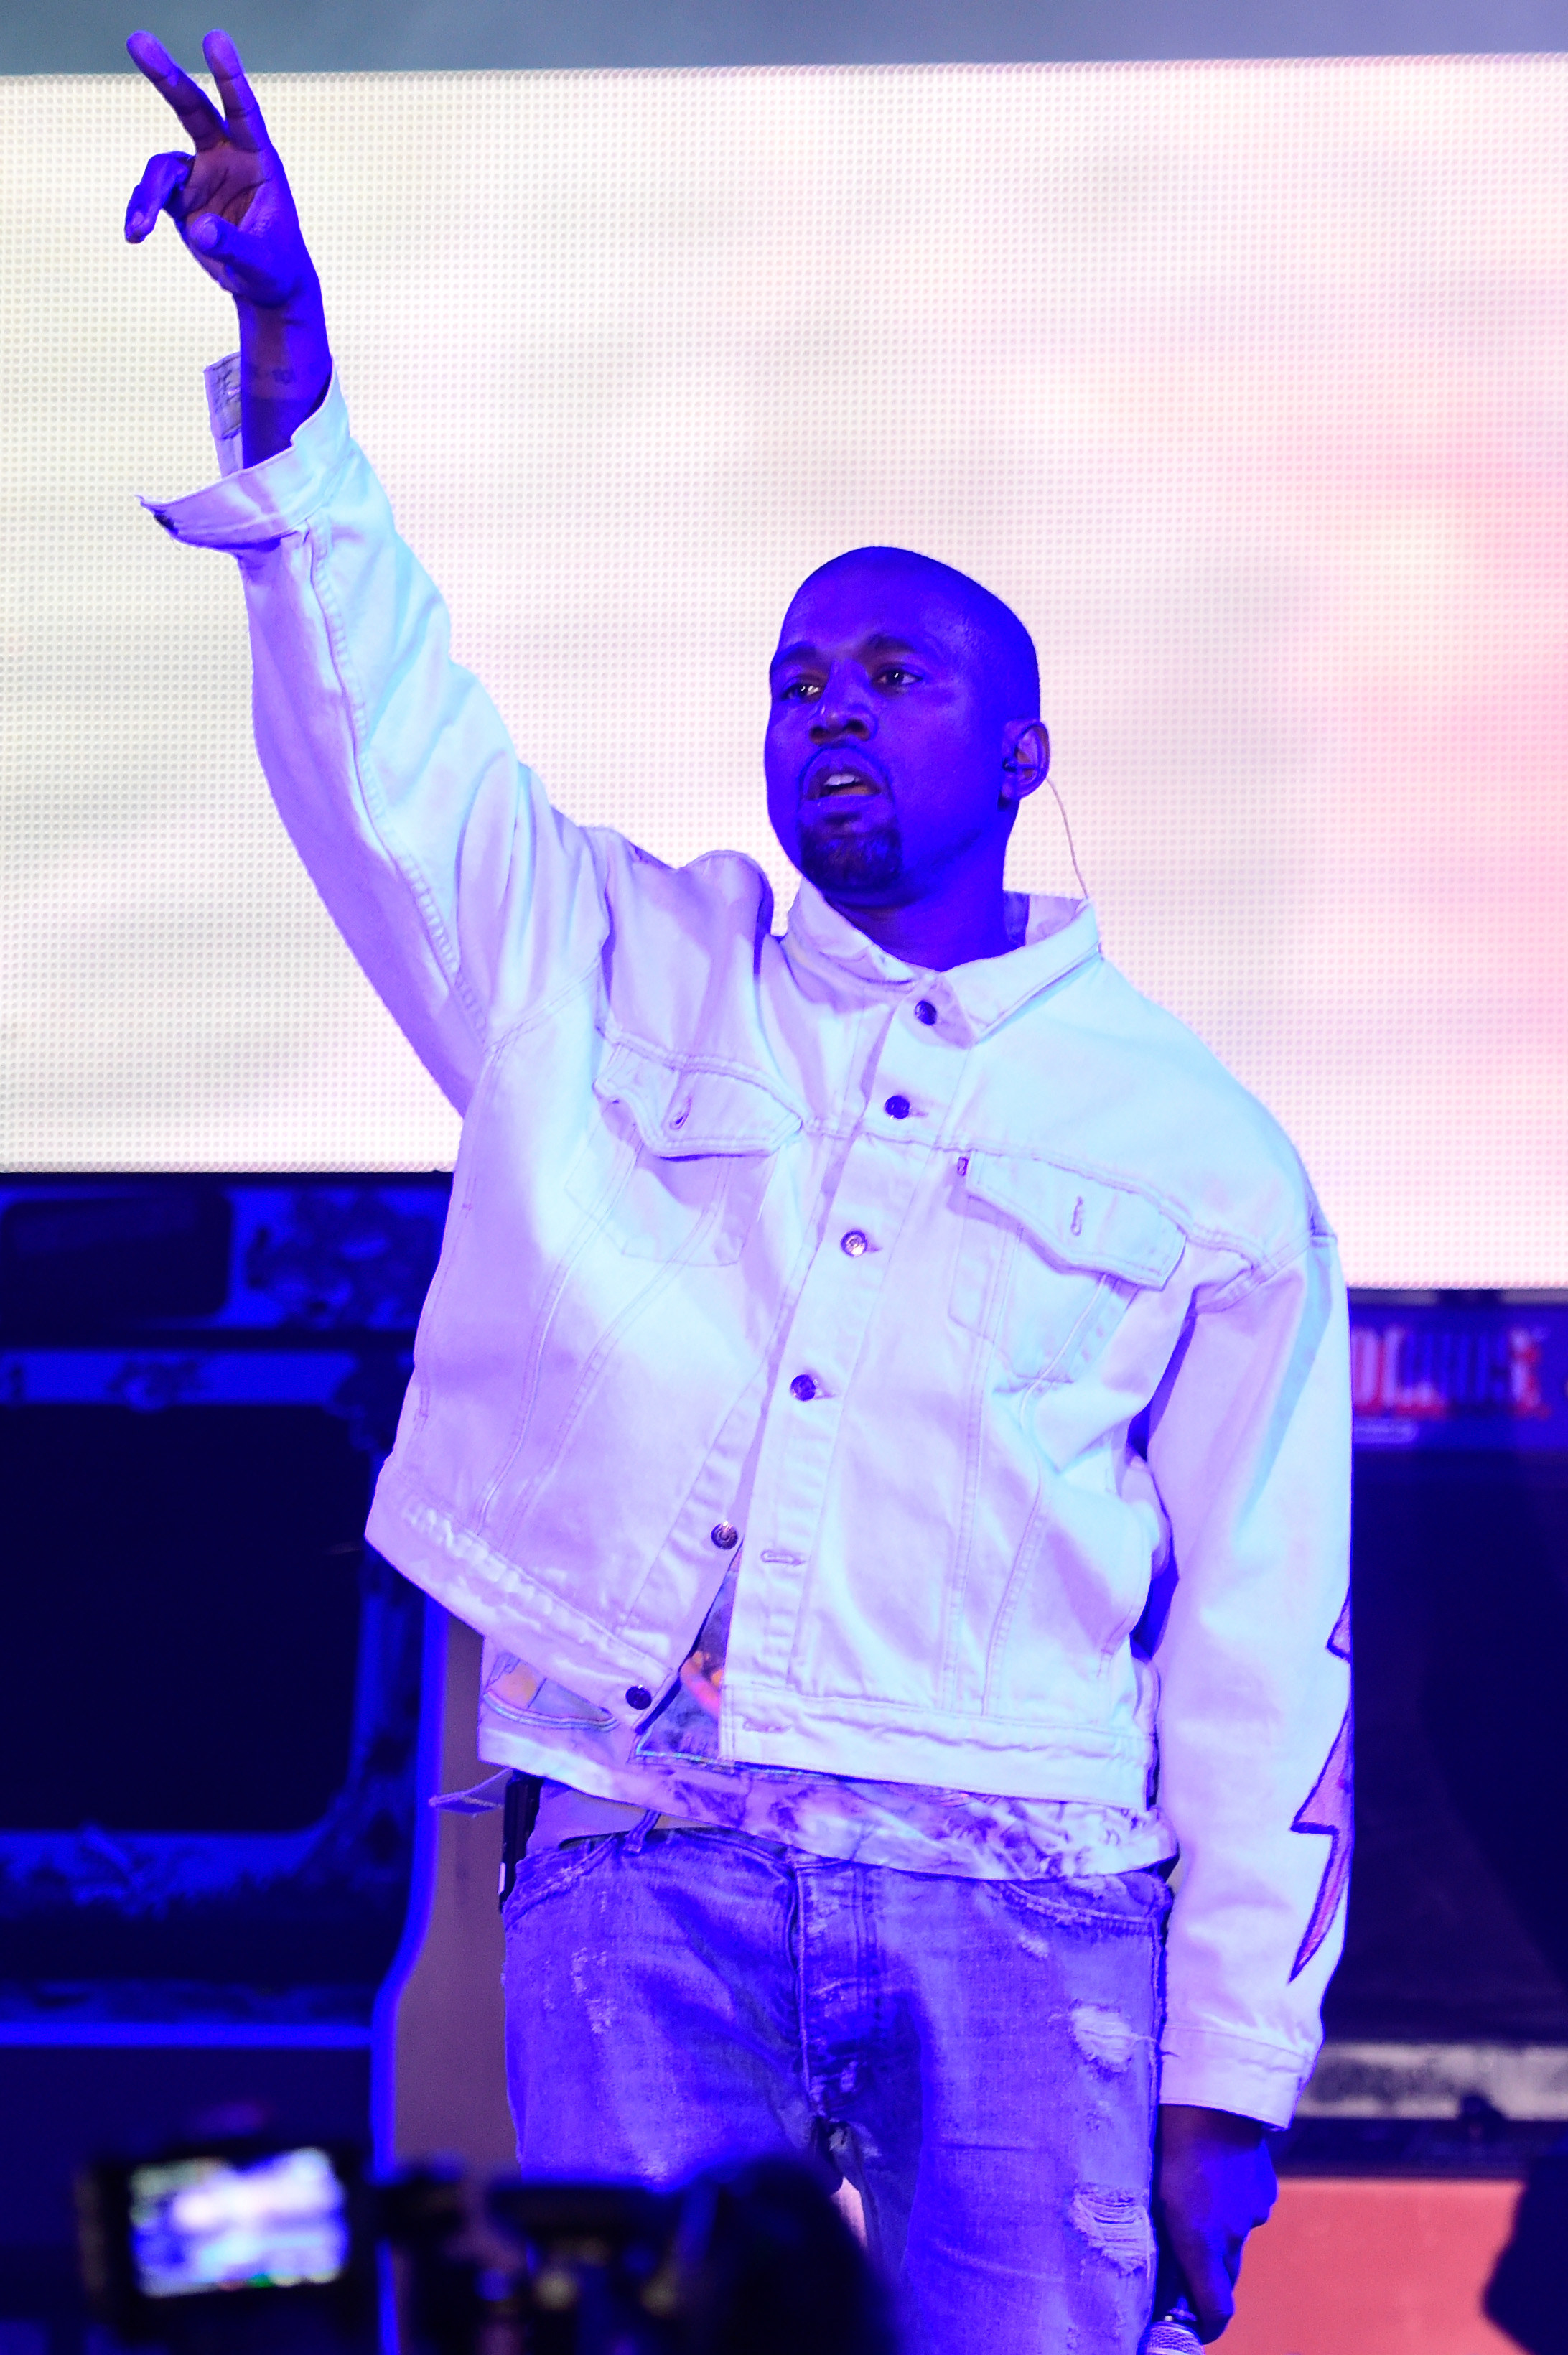 Kanye West performs onstage during day 1 of the 2016 Coachella Valley Music &amp;amp; Arts Festival Weekend 1 at the Empire Polo Club on April 15, 2016